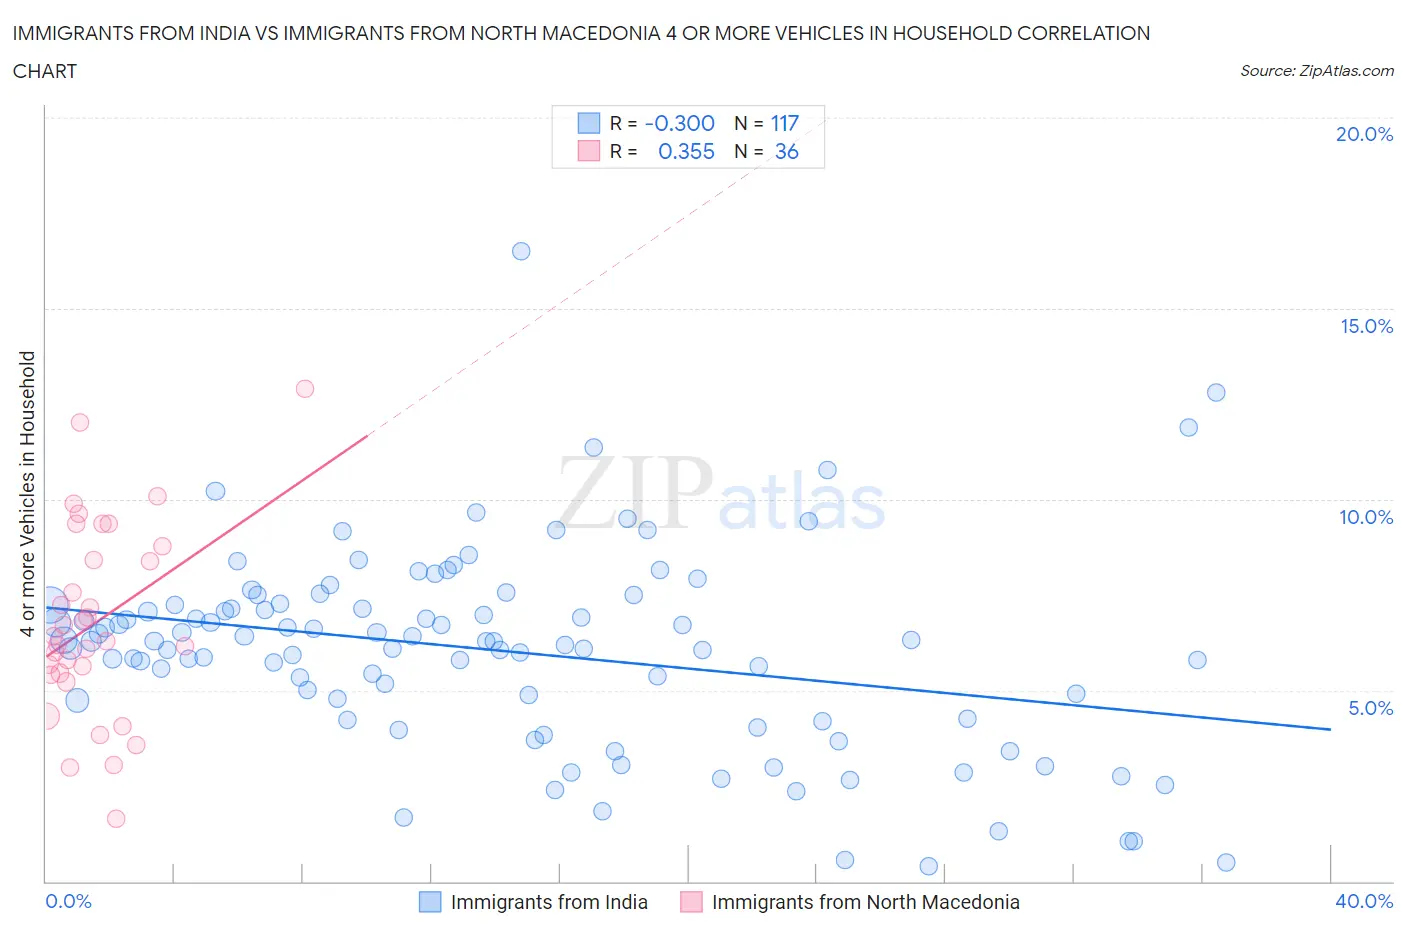 Immigrants from India vs Immigrants from North Macedonia 4 or more Vehicles in Household